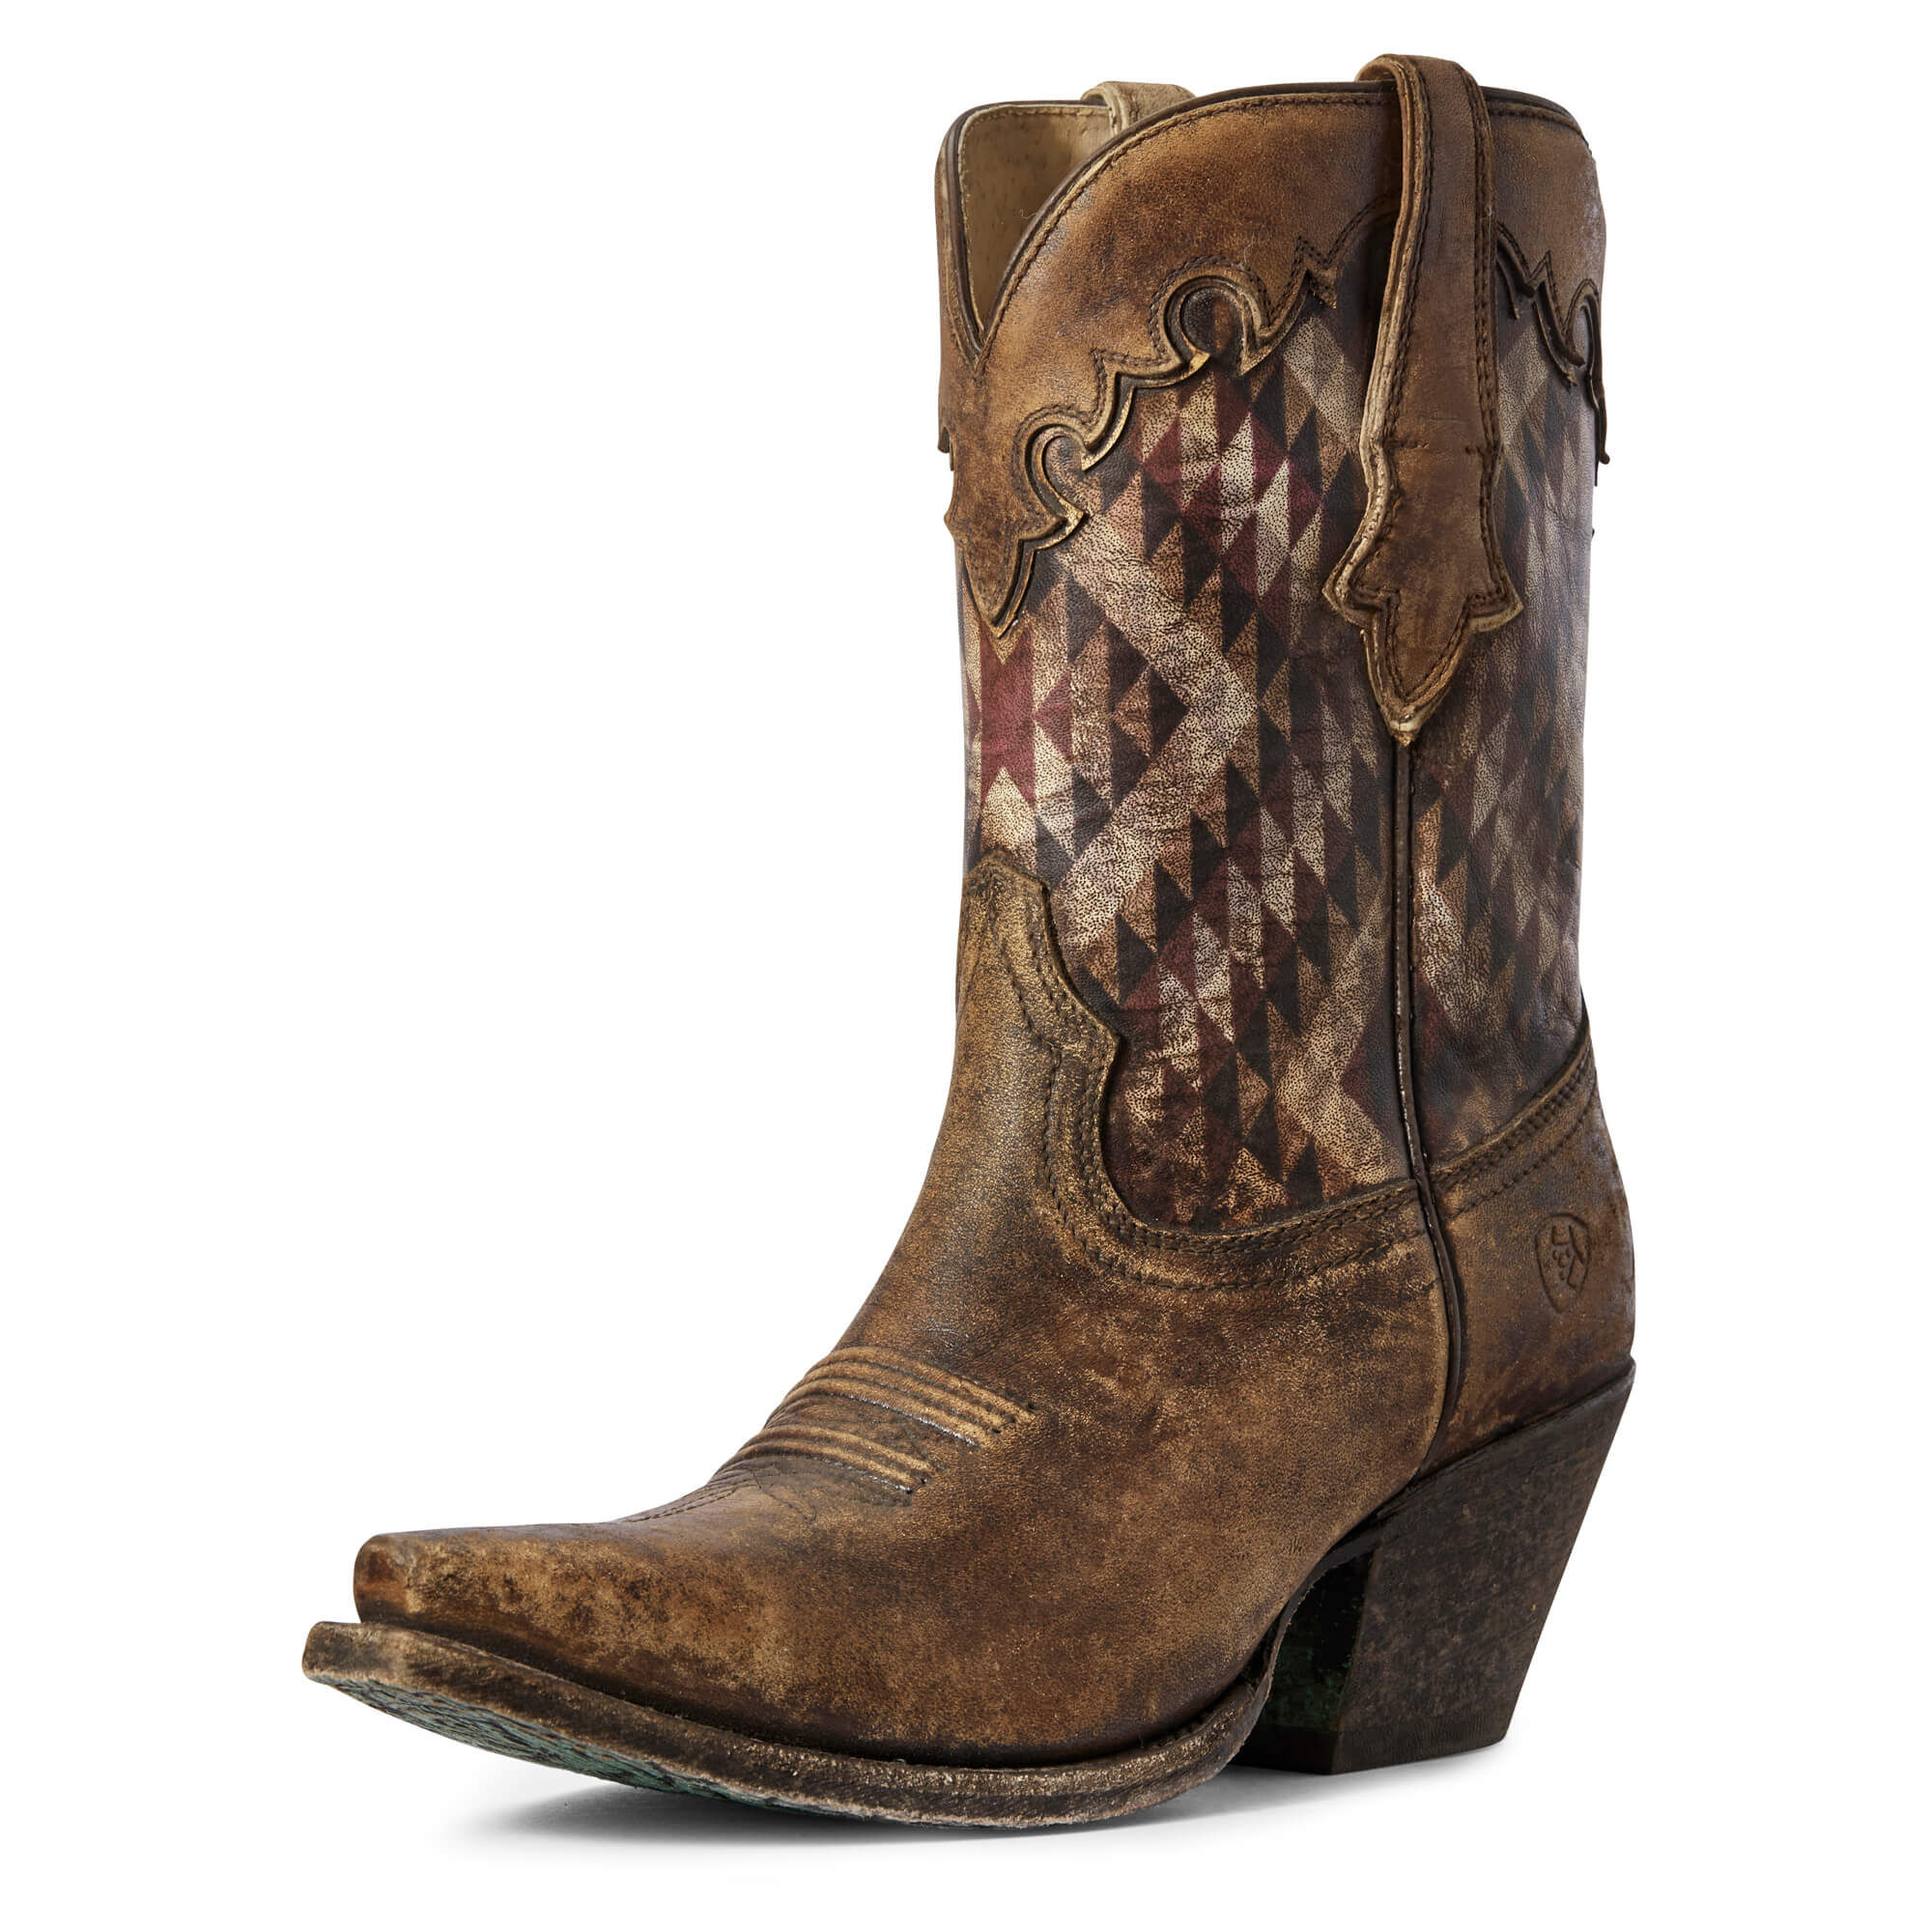 Women's Circuit Gemma Western Boots in Distressed Natural Leather  by Ariat